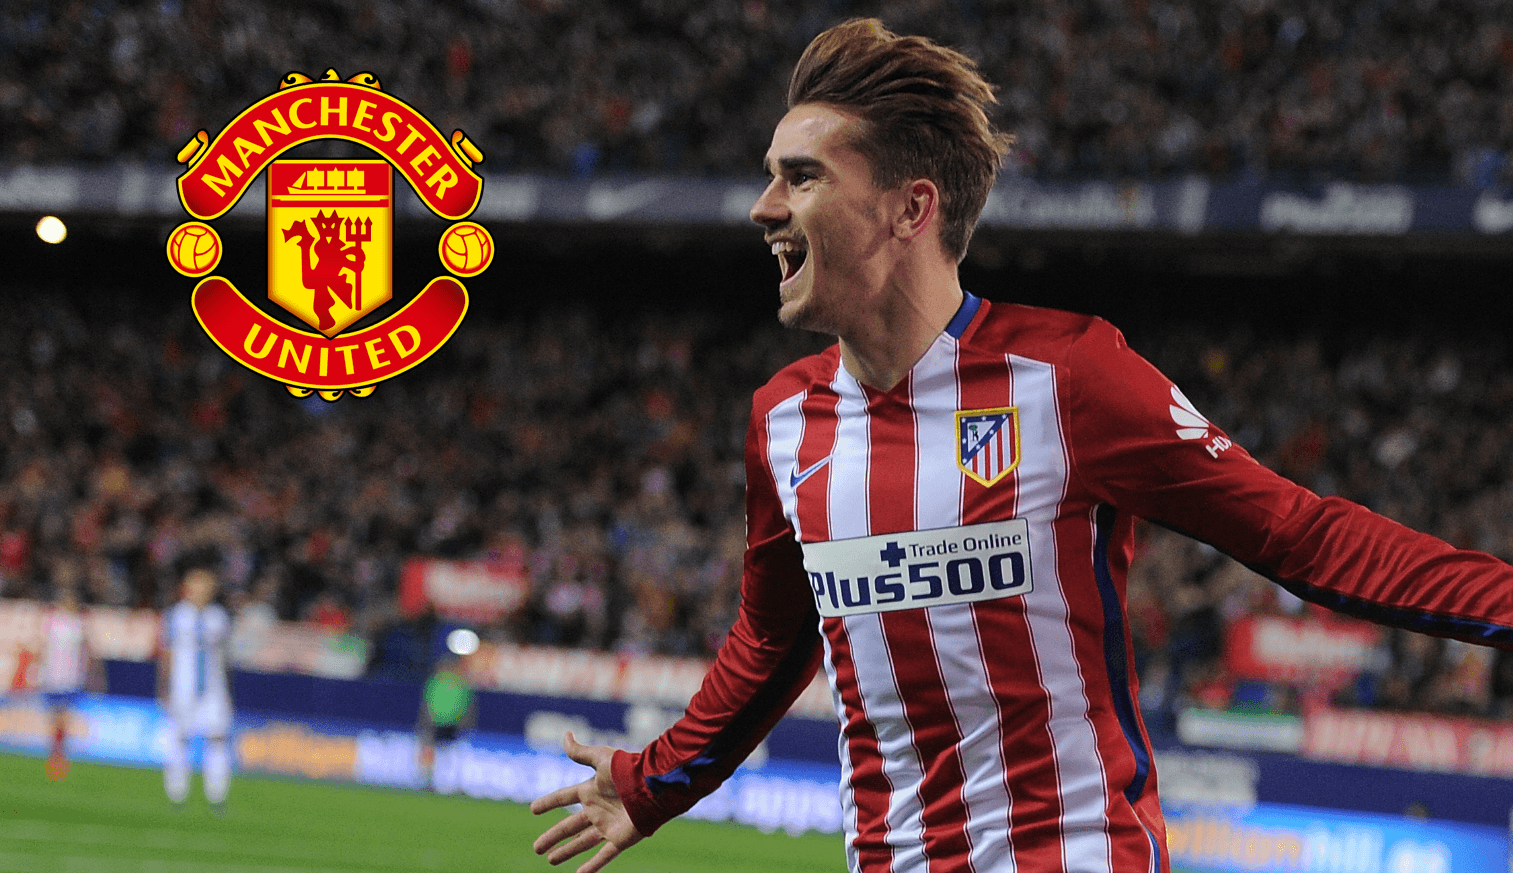 So Is Antoine Griezmann Joining Manchester United Or Not?